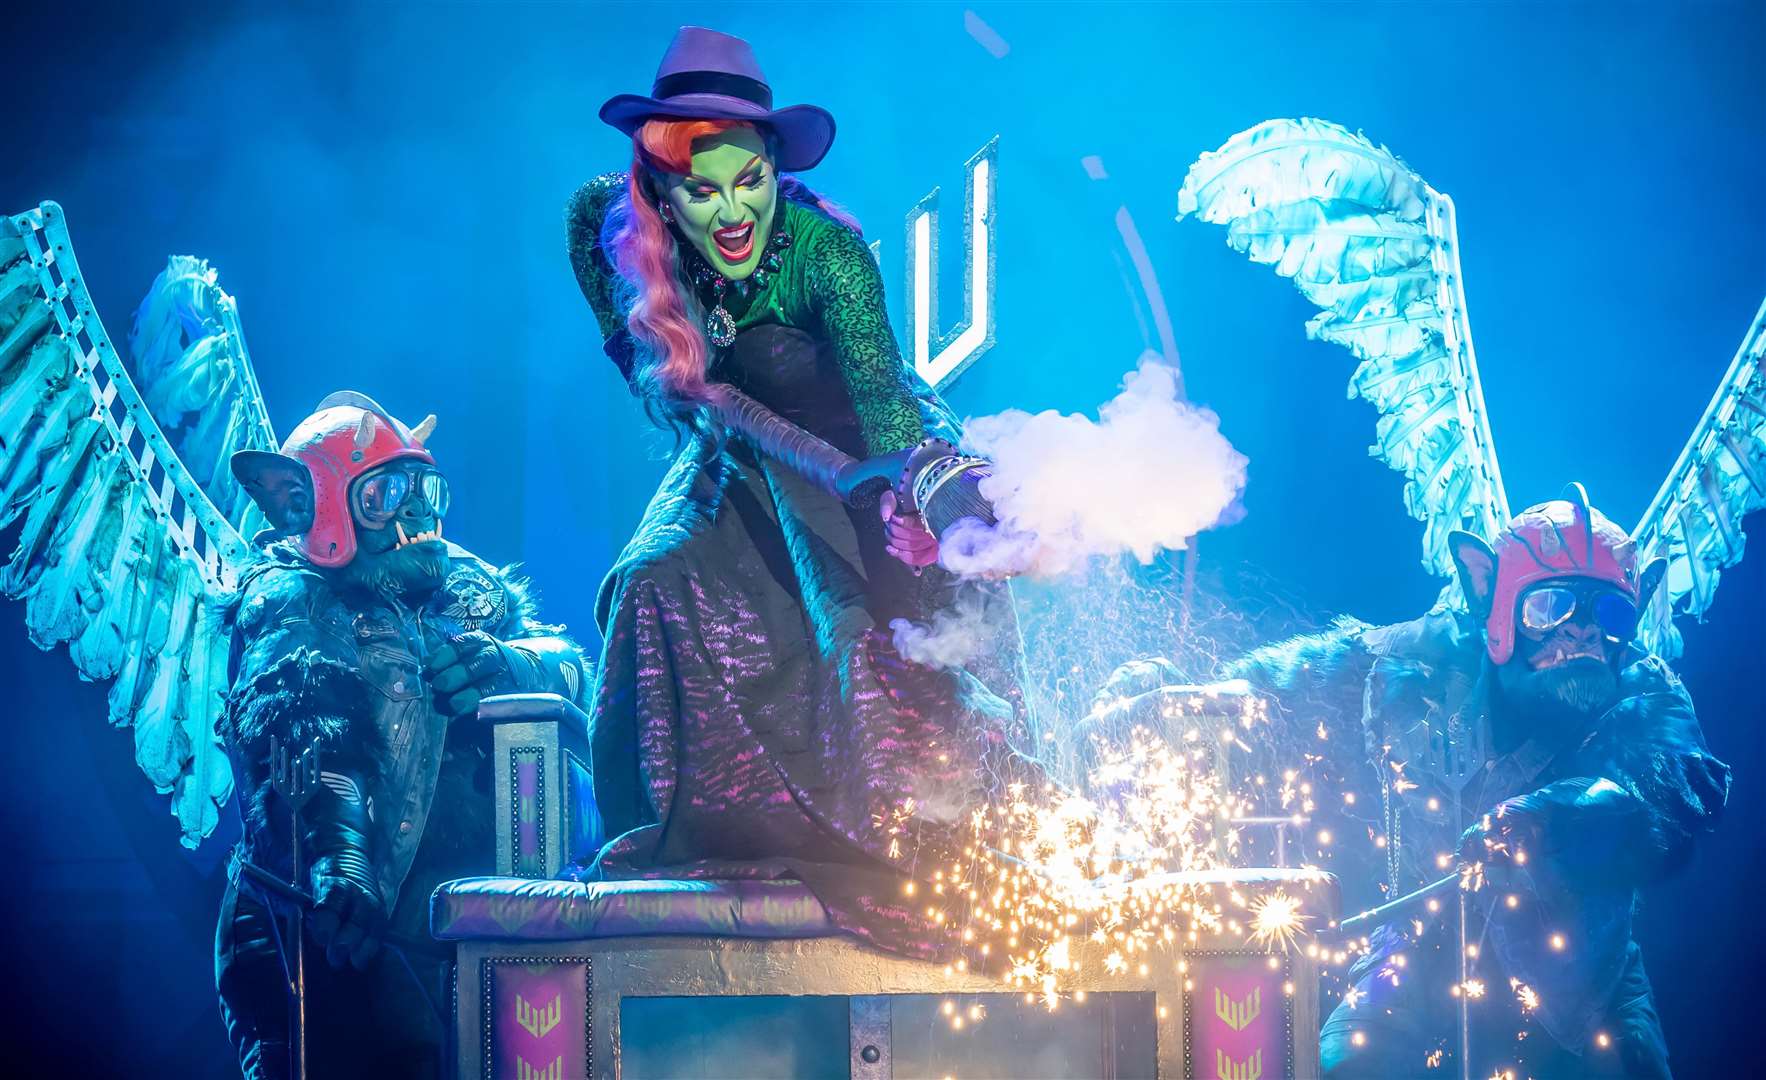 Drag artist The Vivienne takes on a starring role as the Wicked Witch of the West. Picture: Marc Brenner